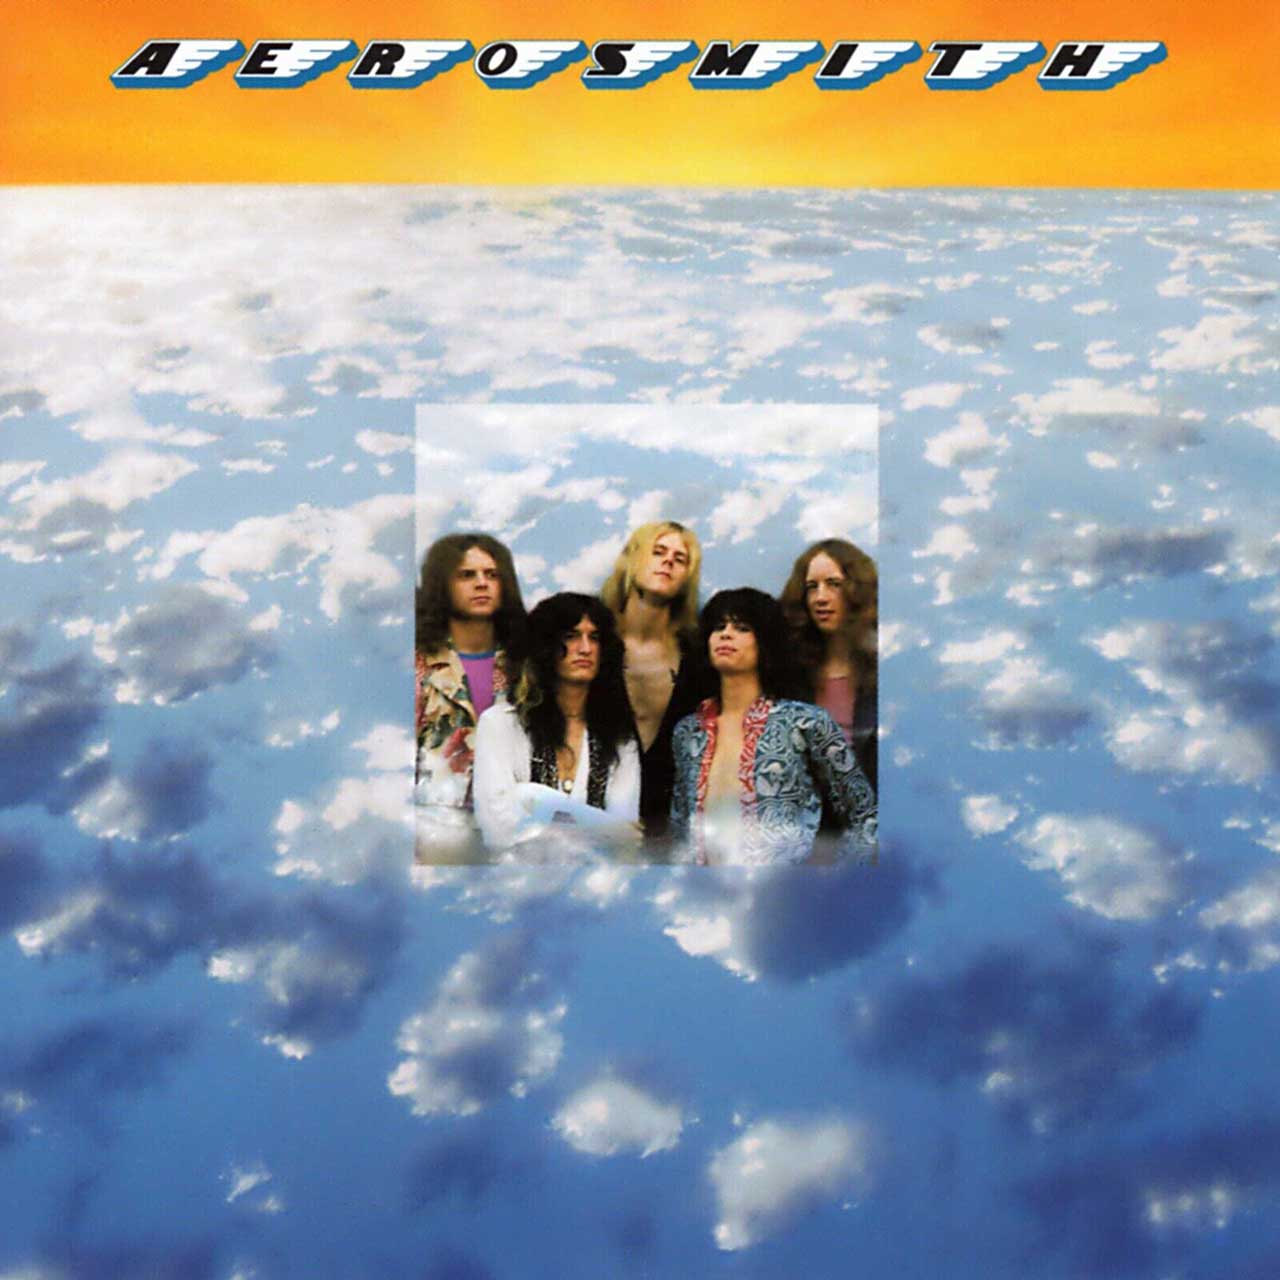 ‘Aerosmith’: The Band’s Self-Titled Debut Album Still Sounds Great